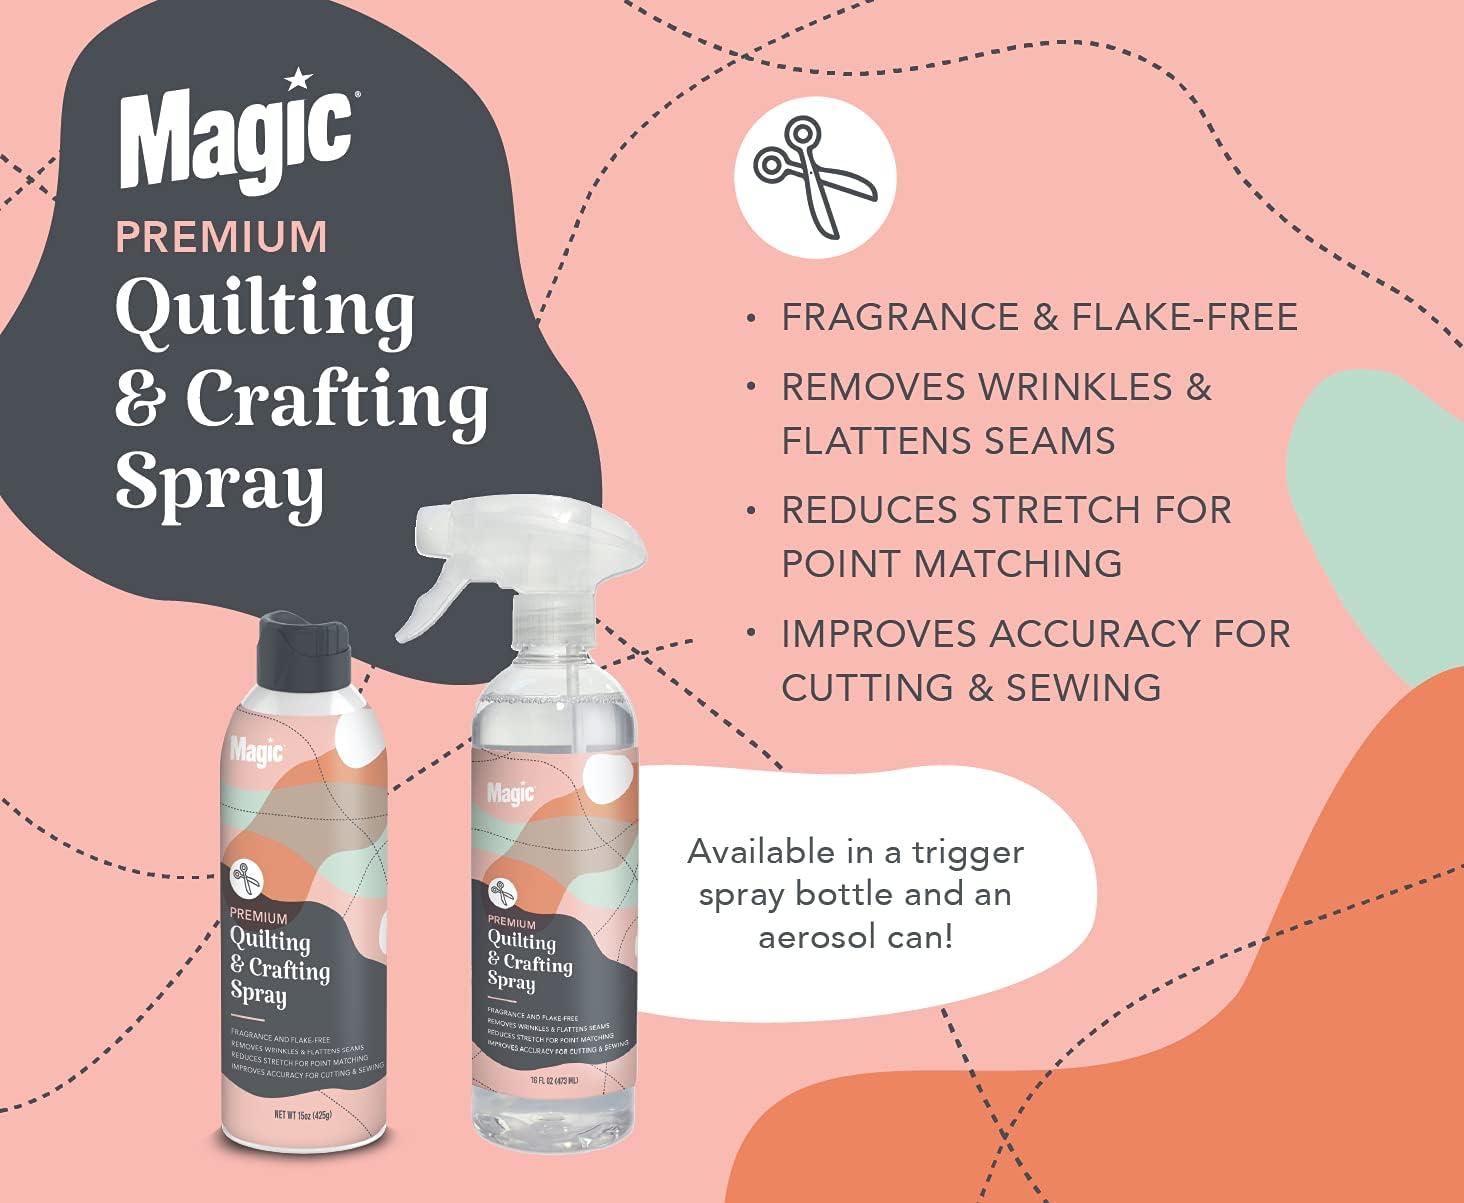 Magic Premium Quilting & Crafting Spray Bottle Fabric Spray for Cutting,  Creasing, & Sewing Best Press Spray Starch for Quilting to Flatten Seams &  Wrinkles Wrinkle Spray (16oz Trigger) 3 Pack Trigger